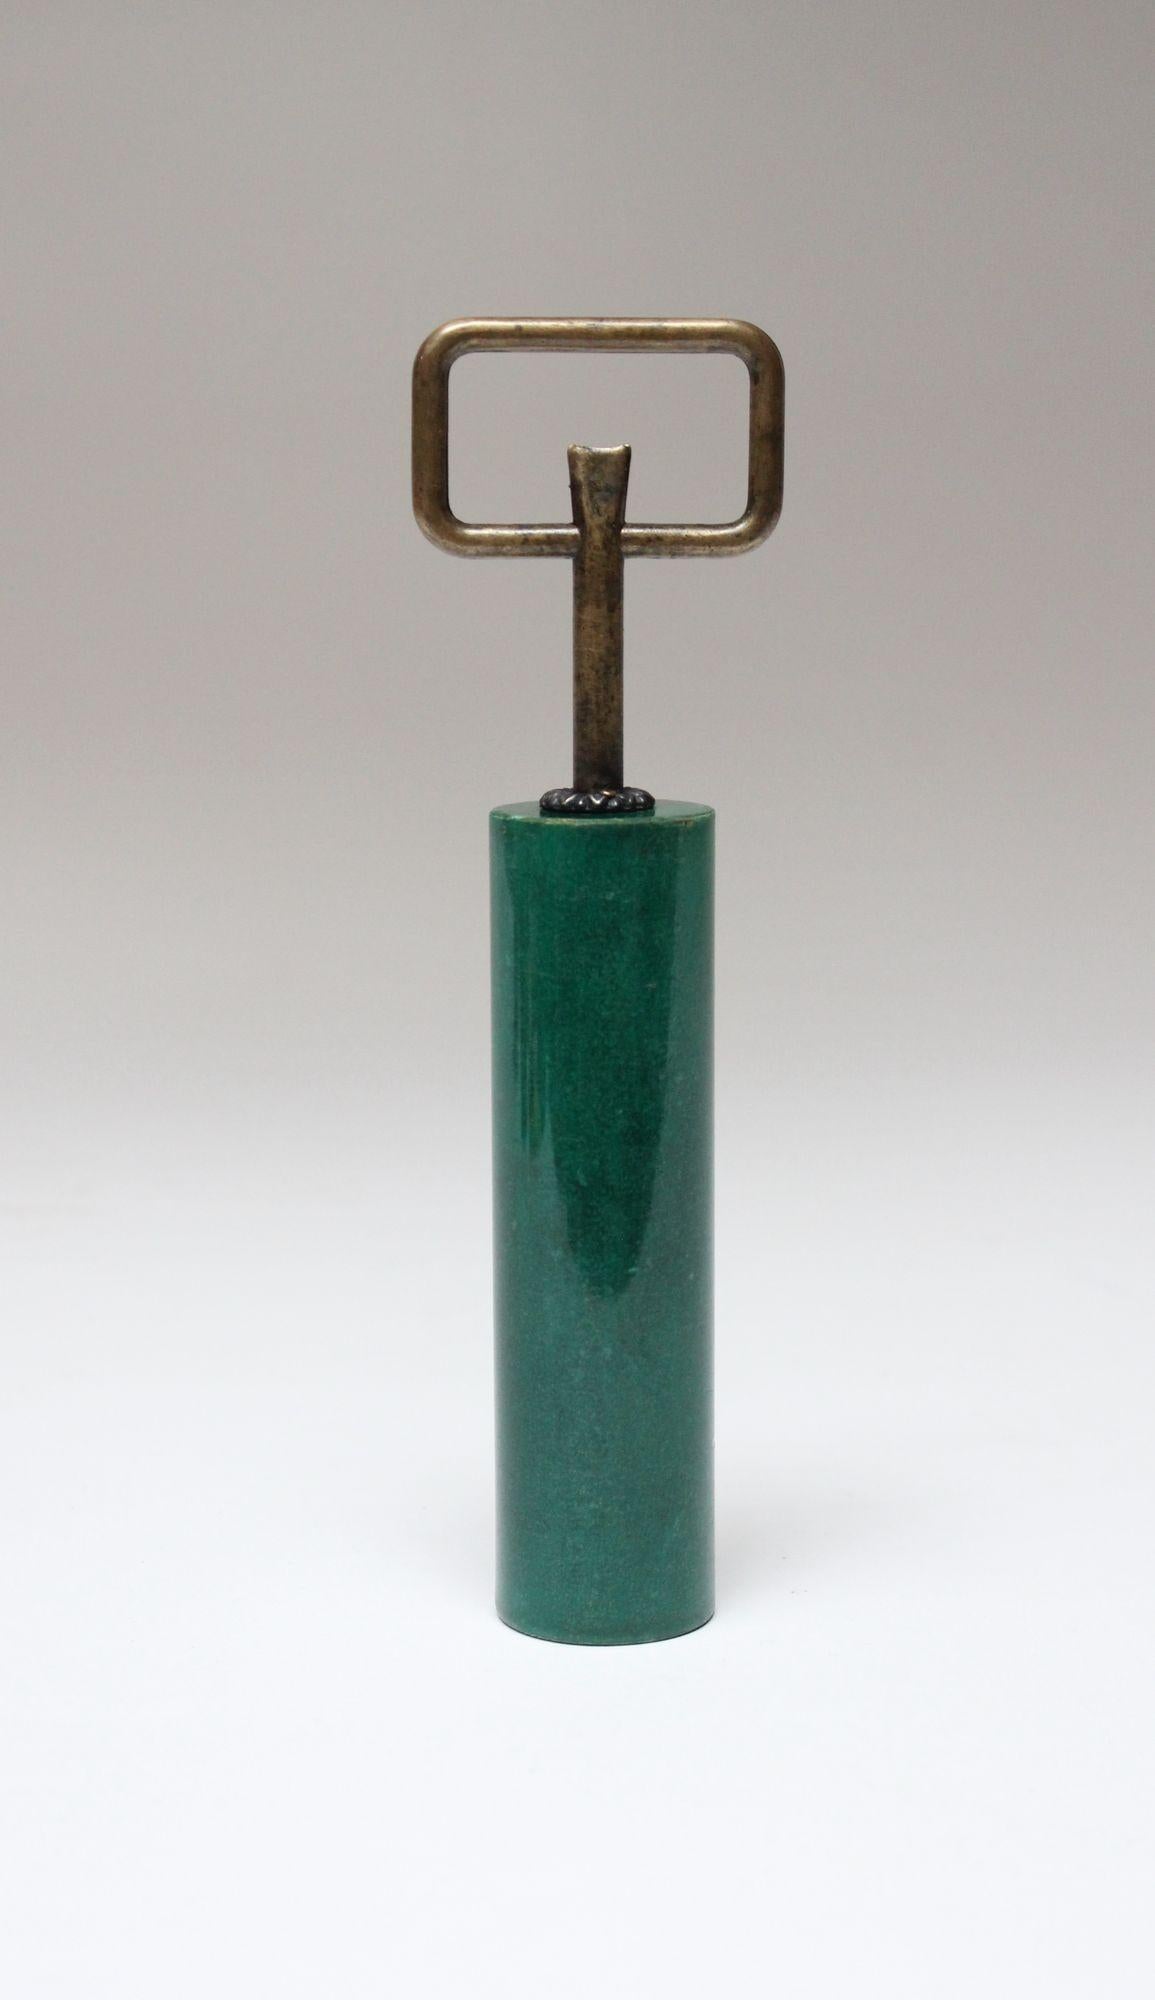 Aldo Tura bottle opener/cap lifter composed of a dyed malachite green goatskin wrapped handle with rectangular brass opener (ca. 1950s, Italy).
Unusual example with the rectangular top (most commonly, the cap lifters are round).
Rich patina to the